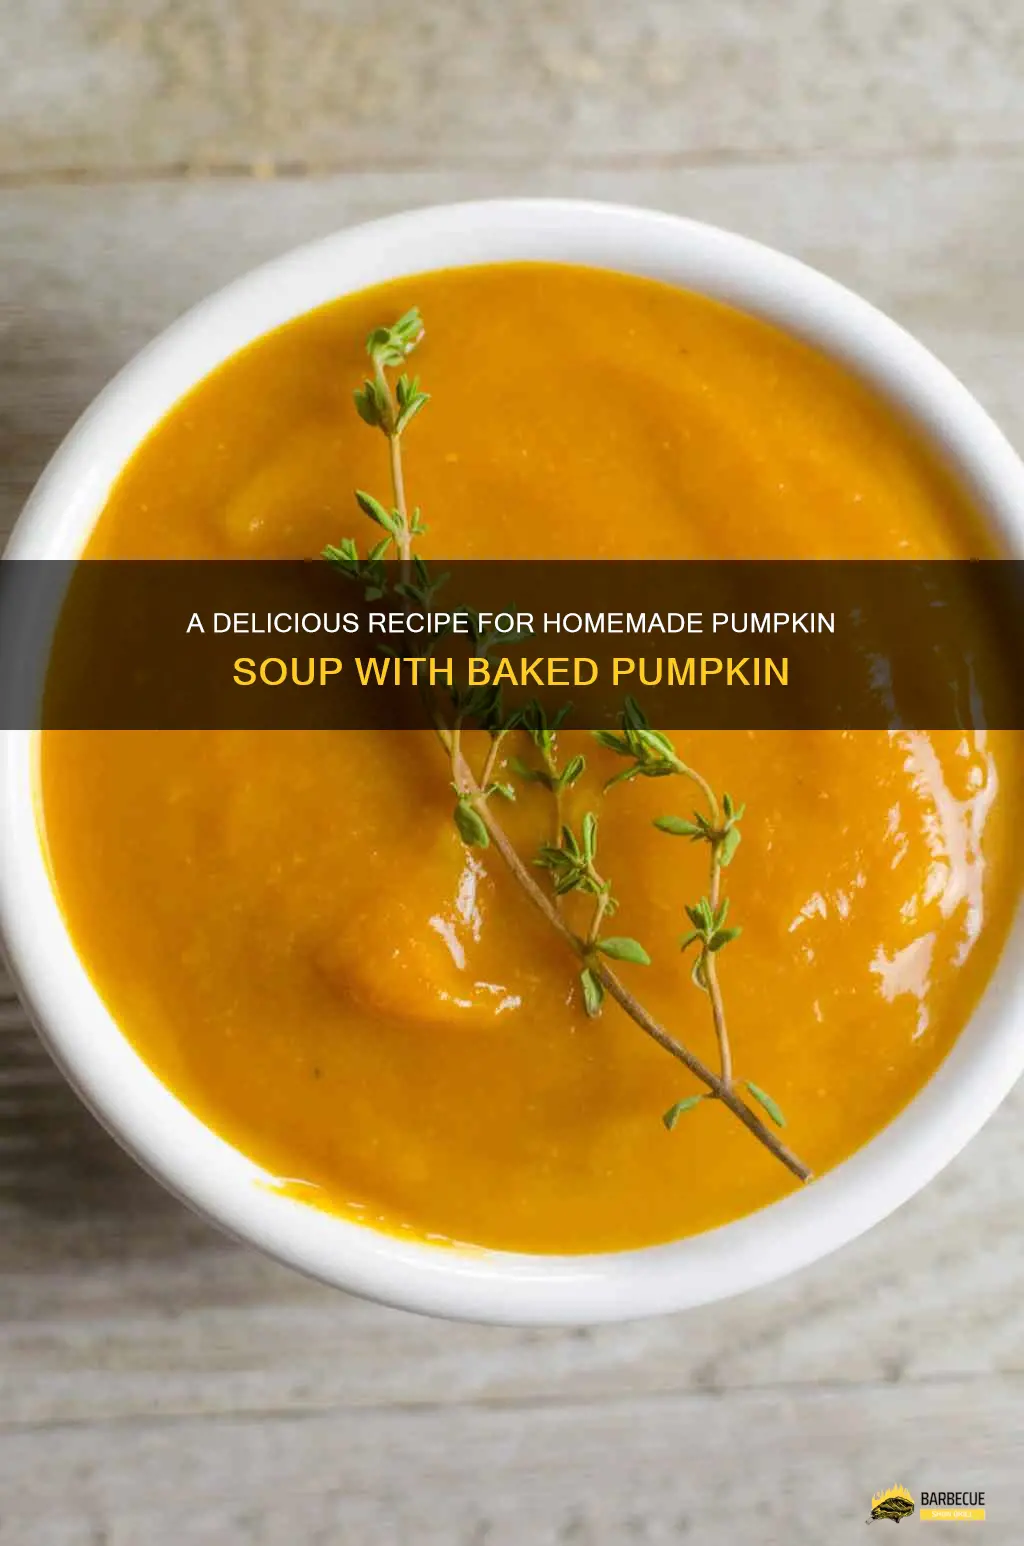 A Delicious Recipe For Homemade Pumpkin Soup With Baked Pumpkin | ShunGrill